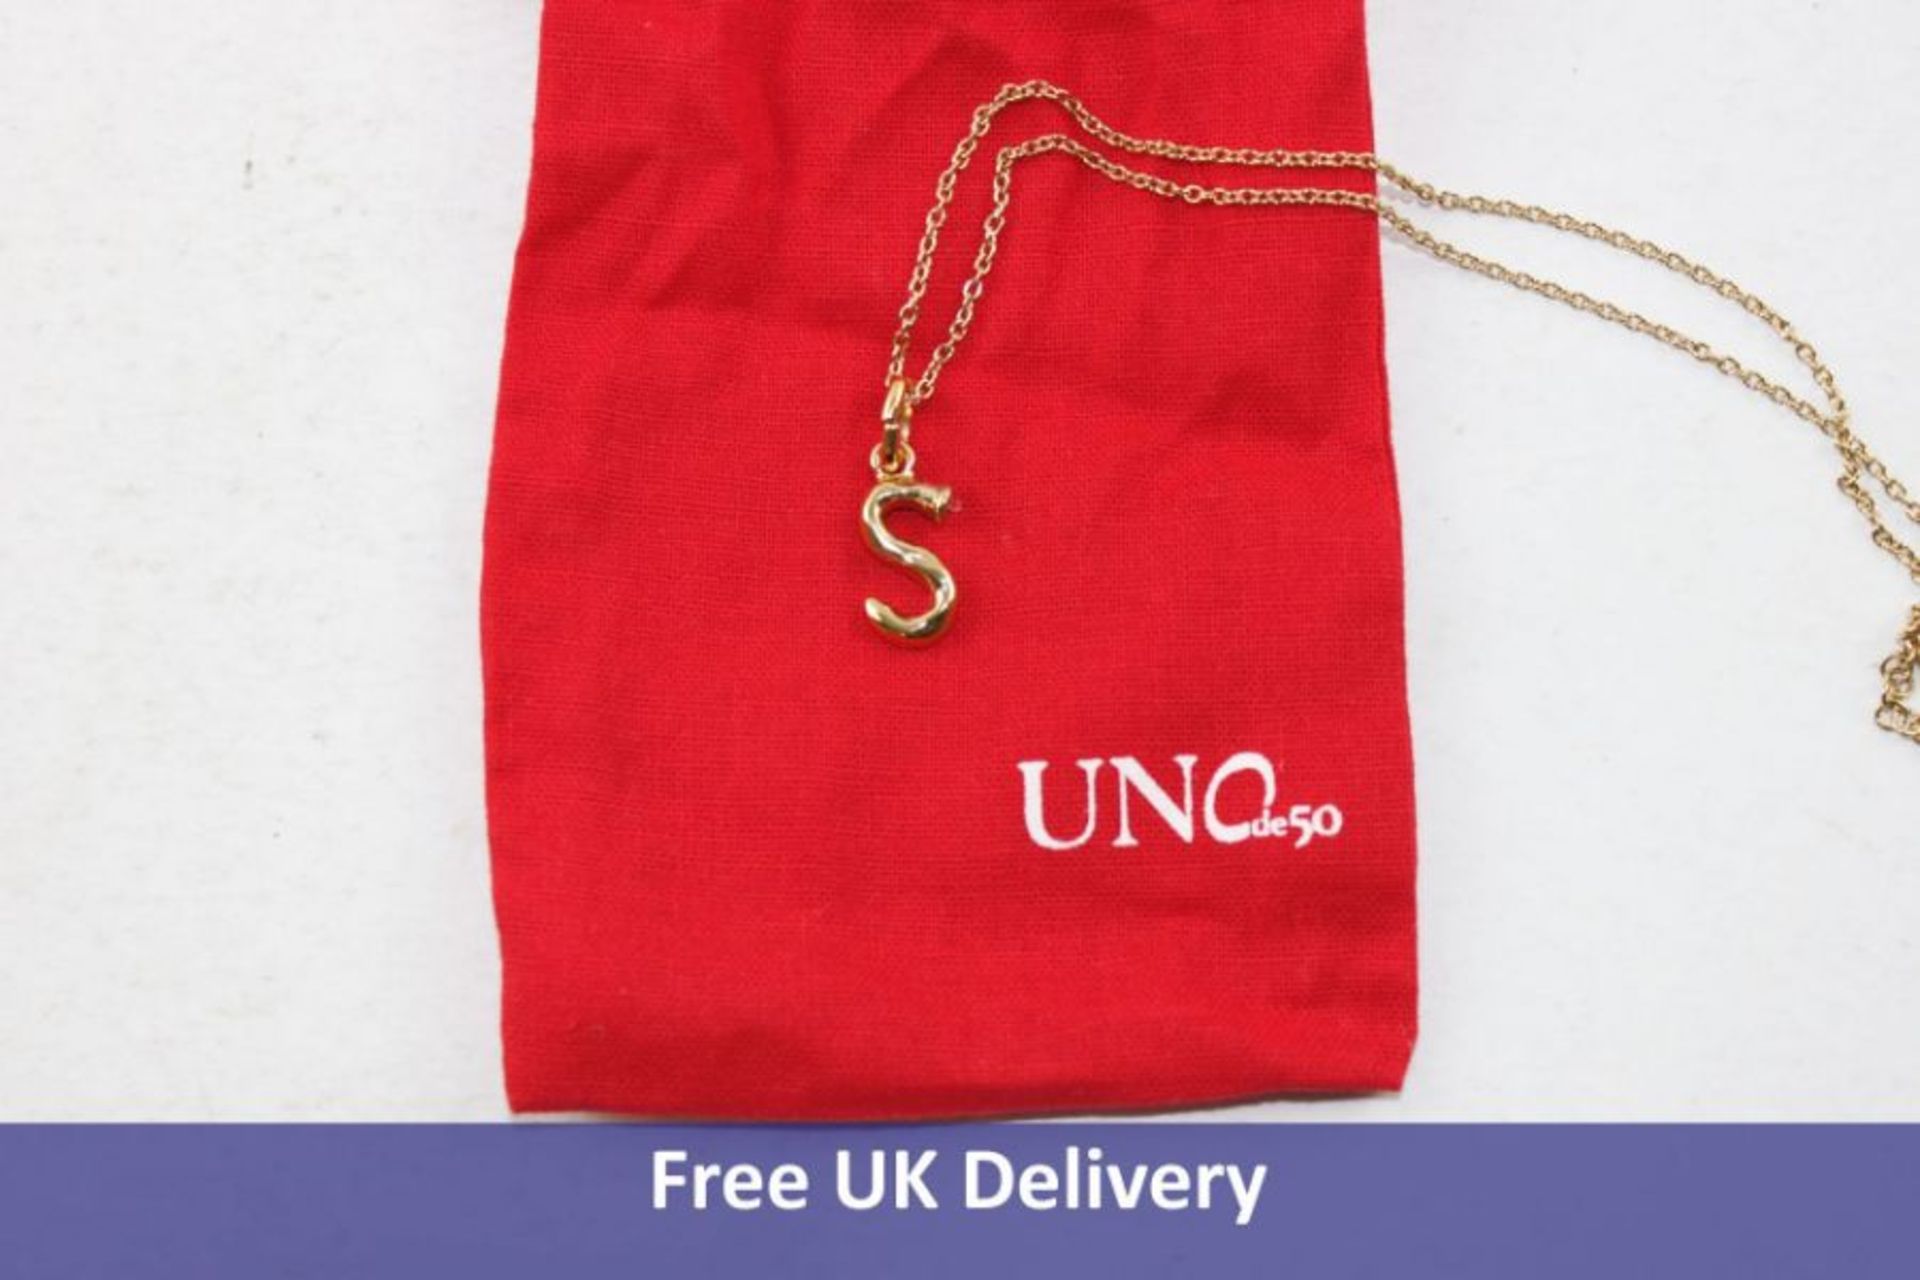 Uno de50 Gold Plated Chain with S Pendant